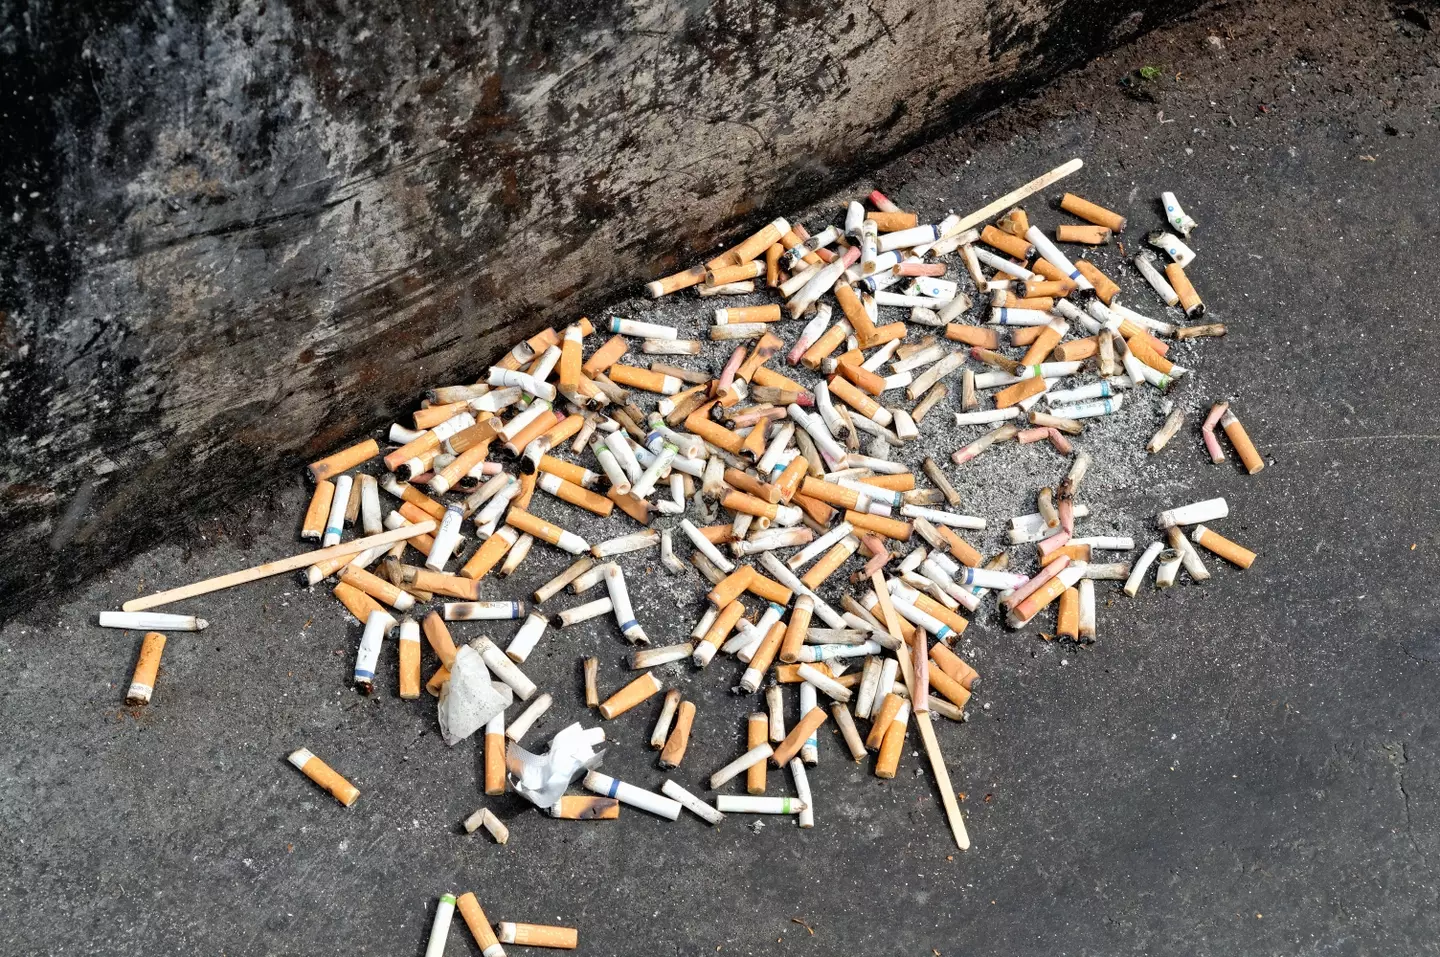 4.5 billion cigarettes are discarded every year.